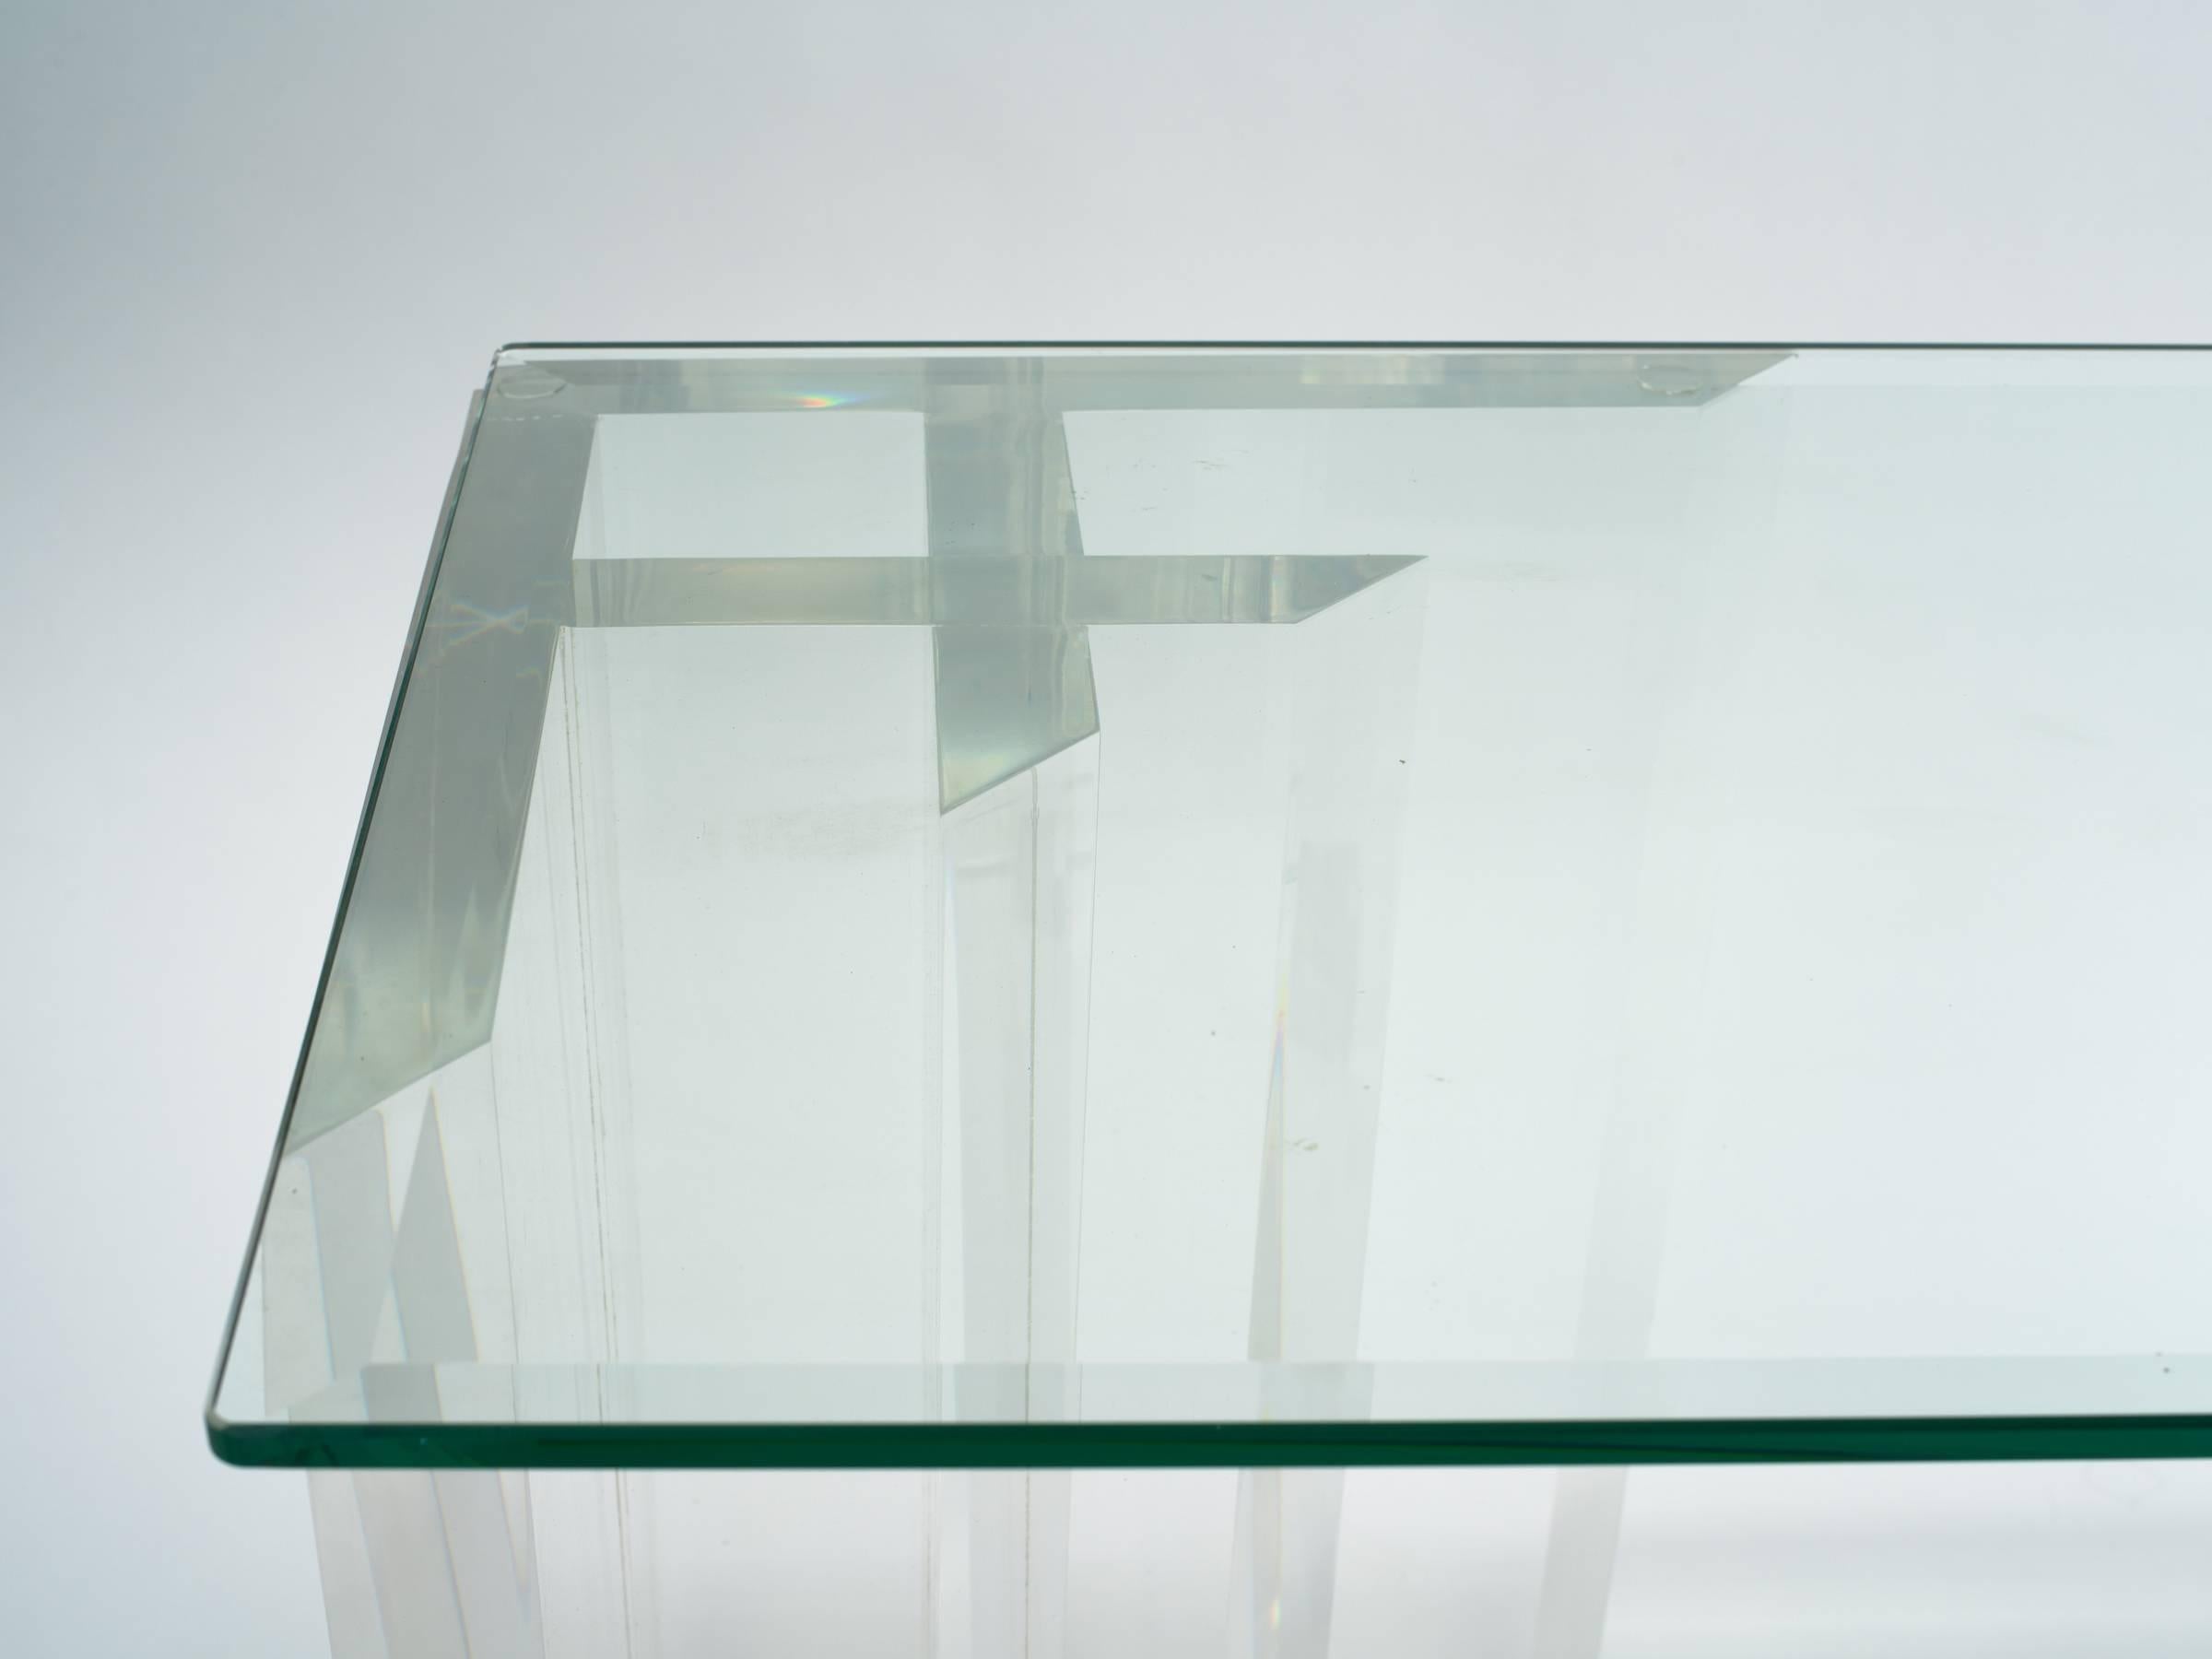 1970s very heavy thick Lucite bases, no glass. The glass shown is not included in the piece. It is merely to show how the console will look once a piece of glass is placed.

The console can be as long as you wish depending on the length of your